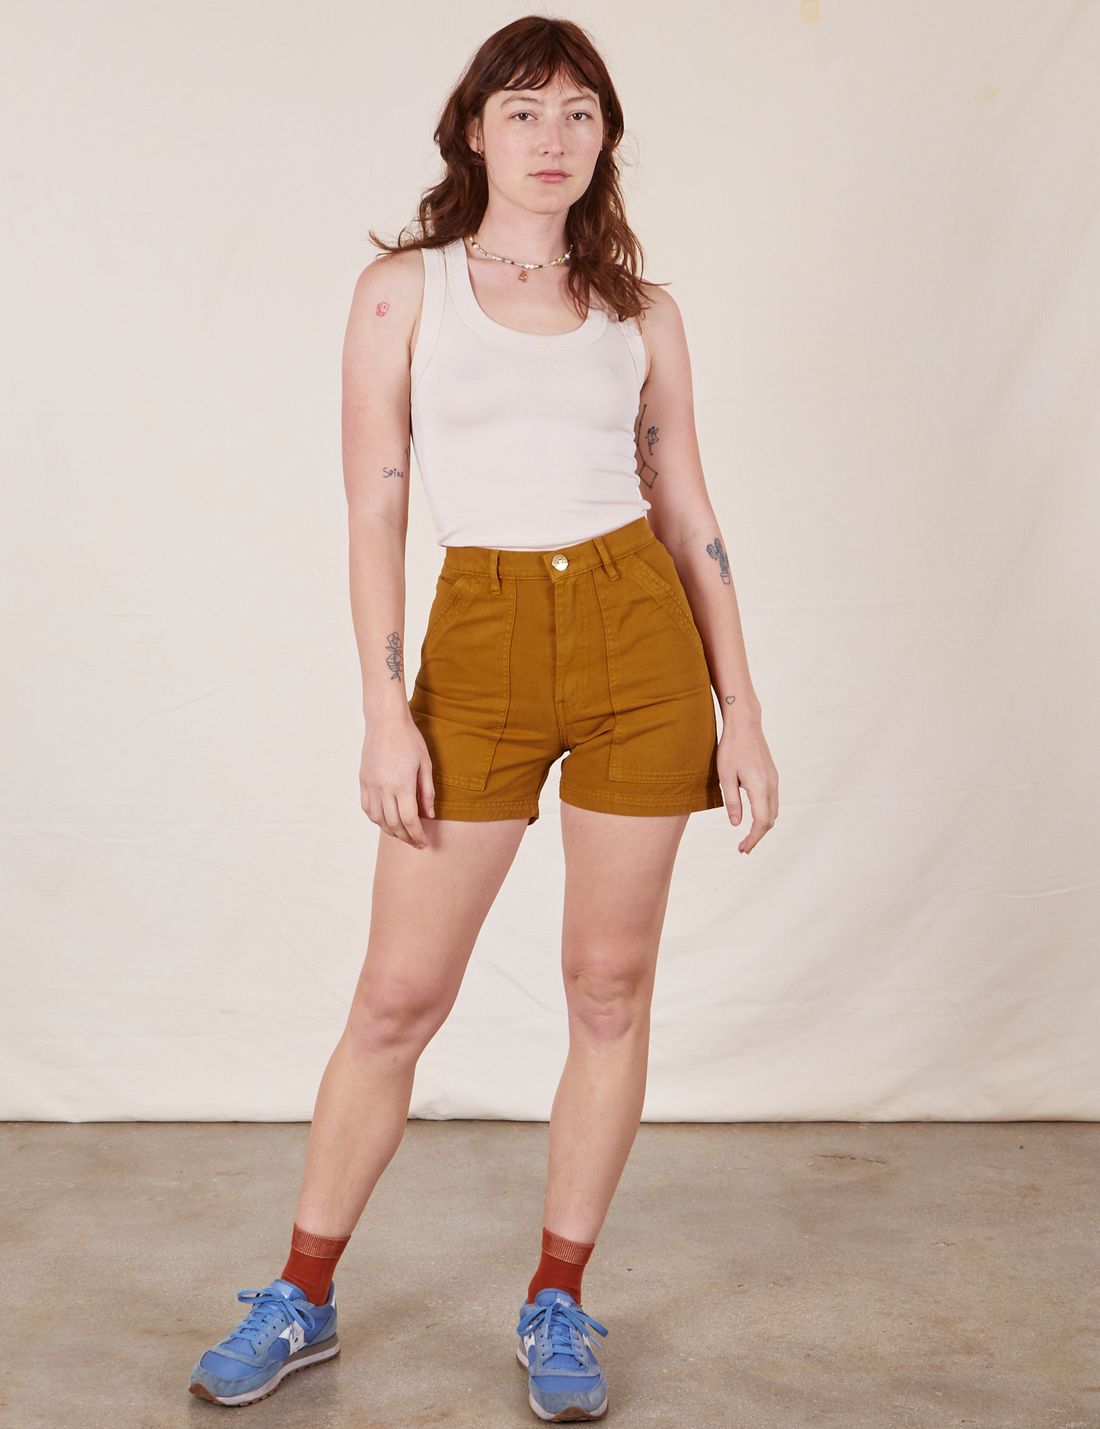 Alex is wearing Classic Work Shorts in Spicy Mustard and vintage off-white Tank Top